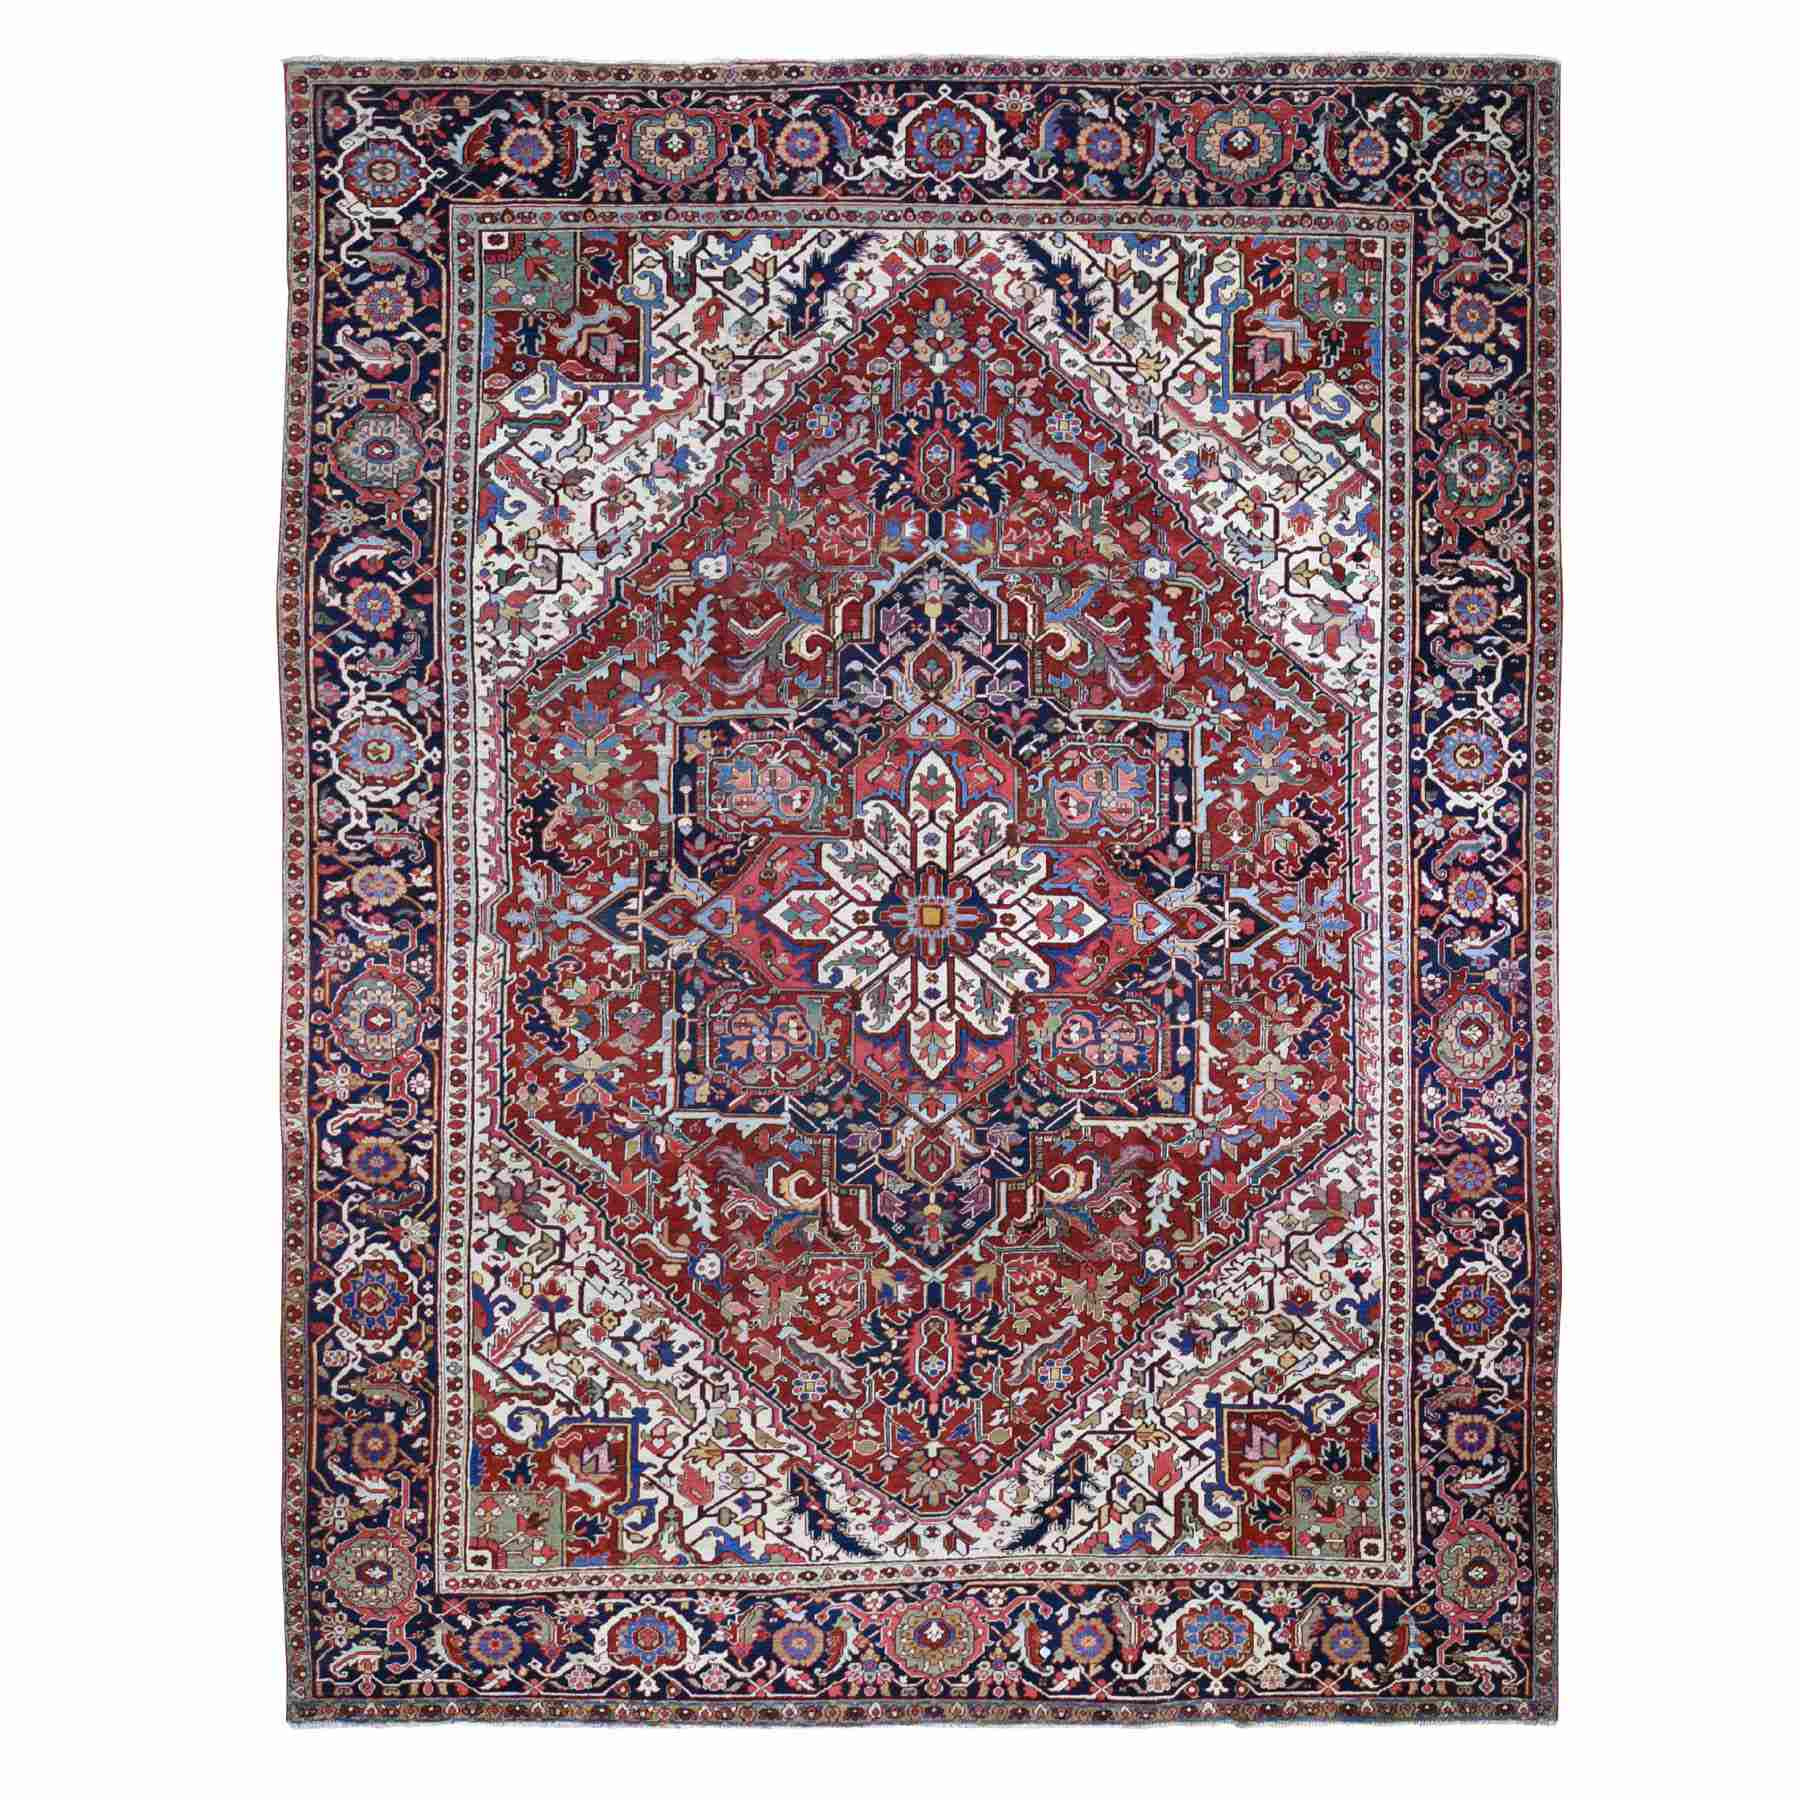 Antique-Hand-Knotted-Rug-295025